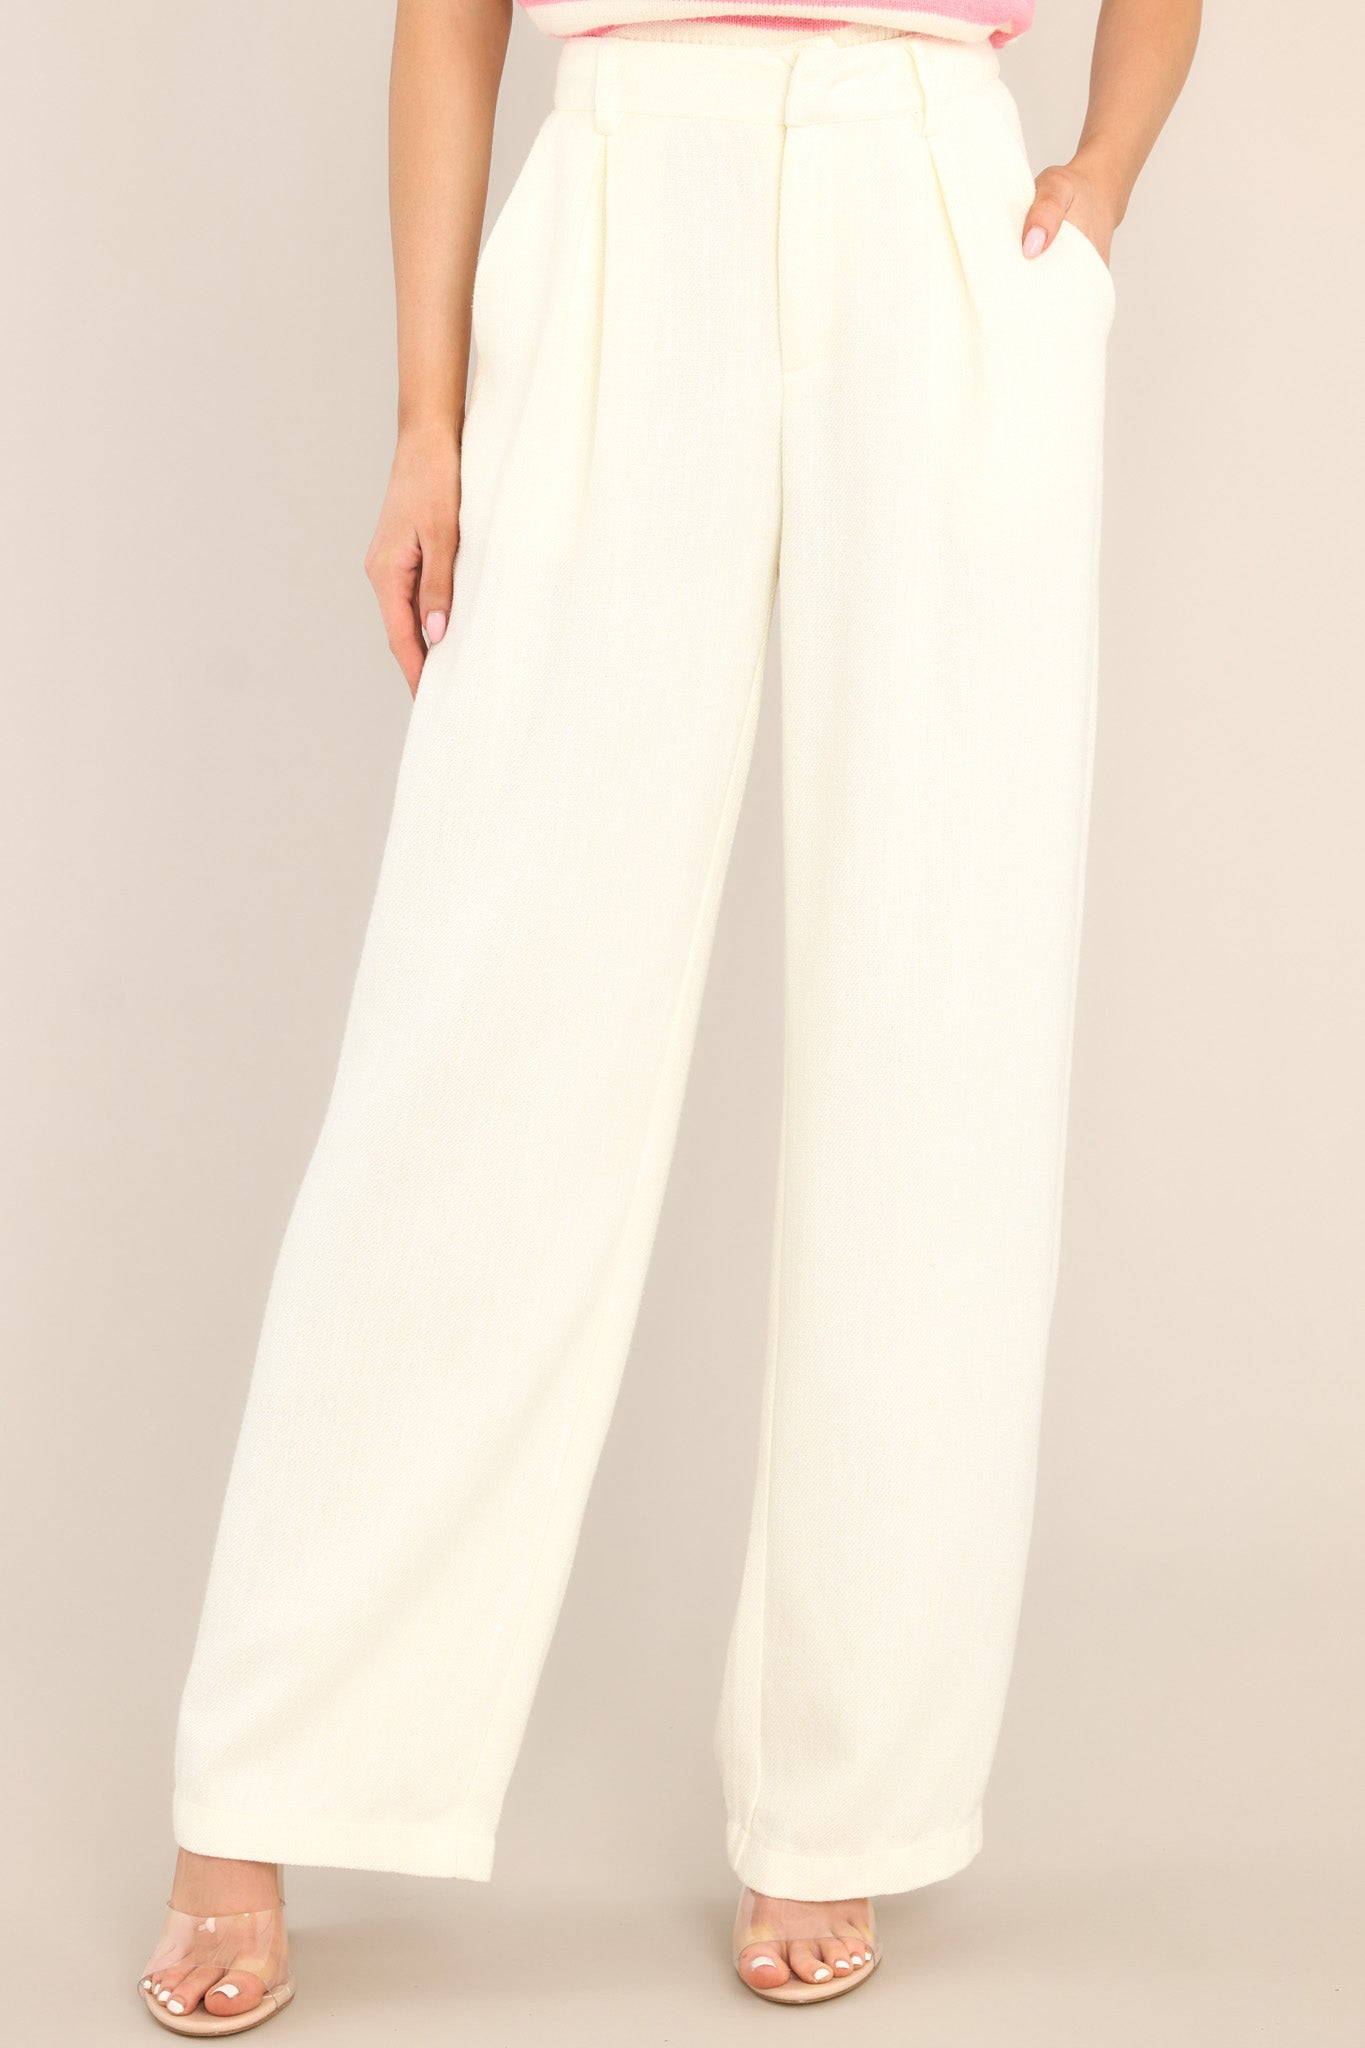 Fancybees Regular Fit Women White Trousers - Buy Fancybees Regular Fit Women  White Trousers Online at Best Prices in India | Flipkart.com